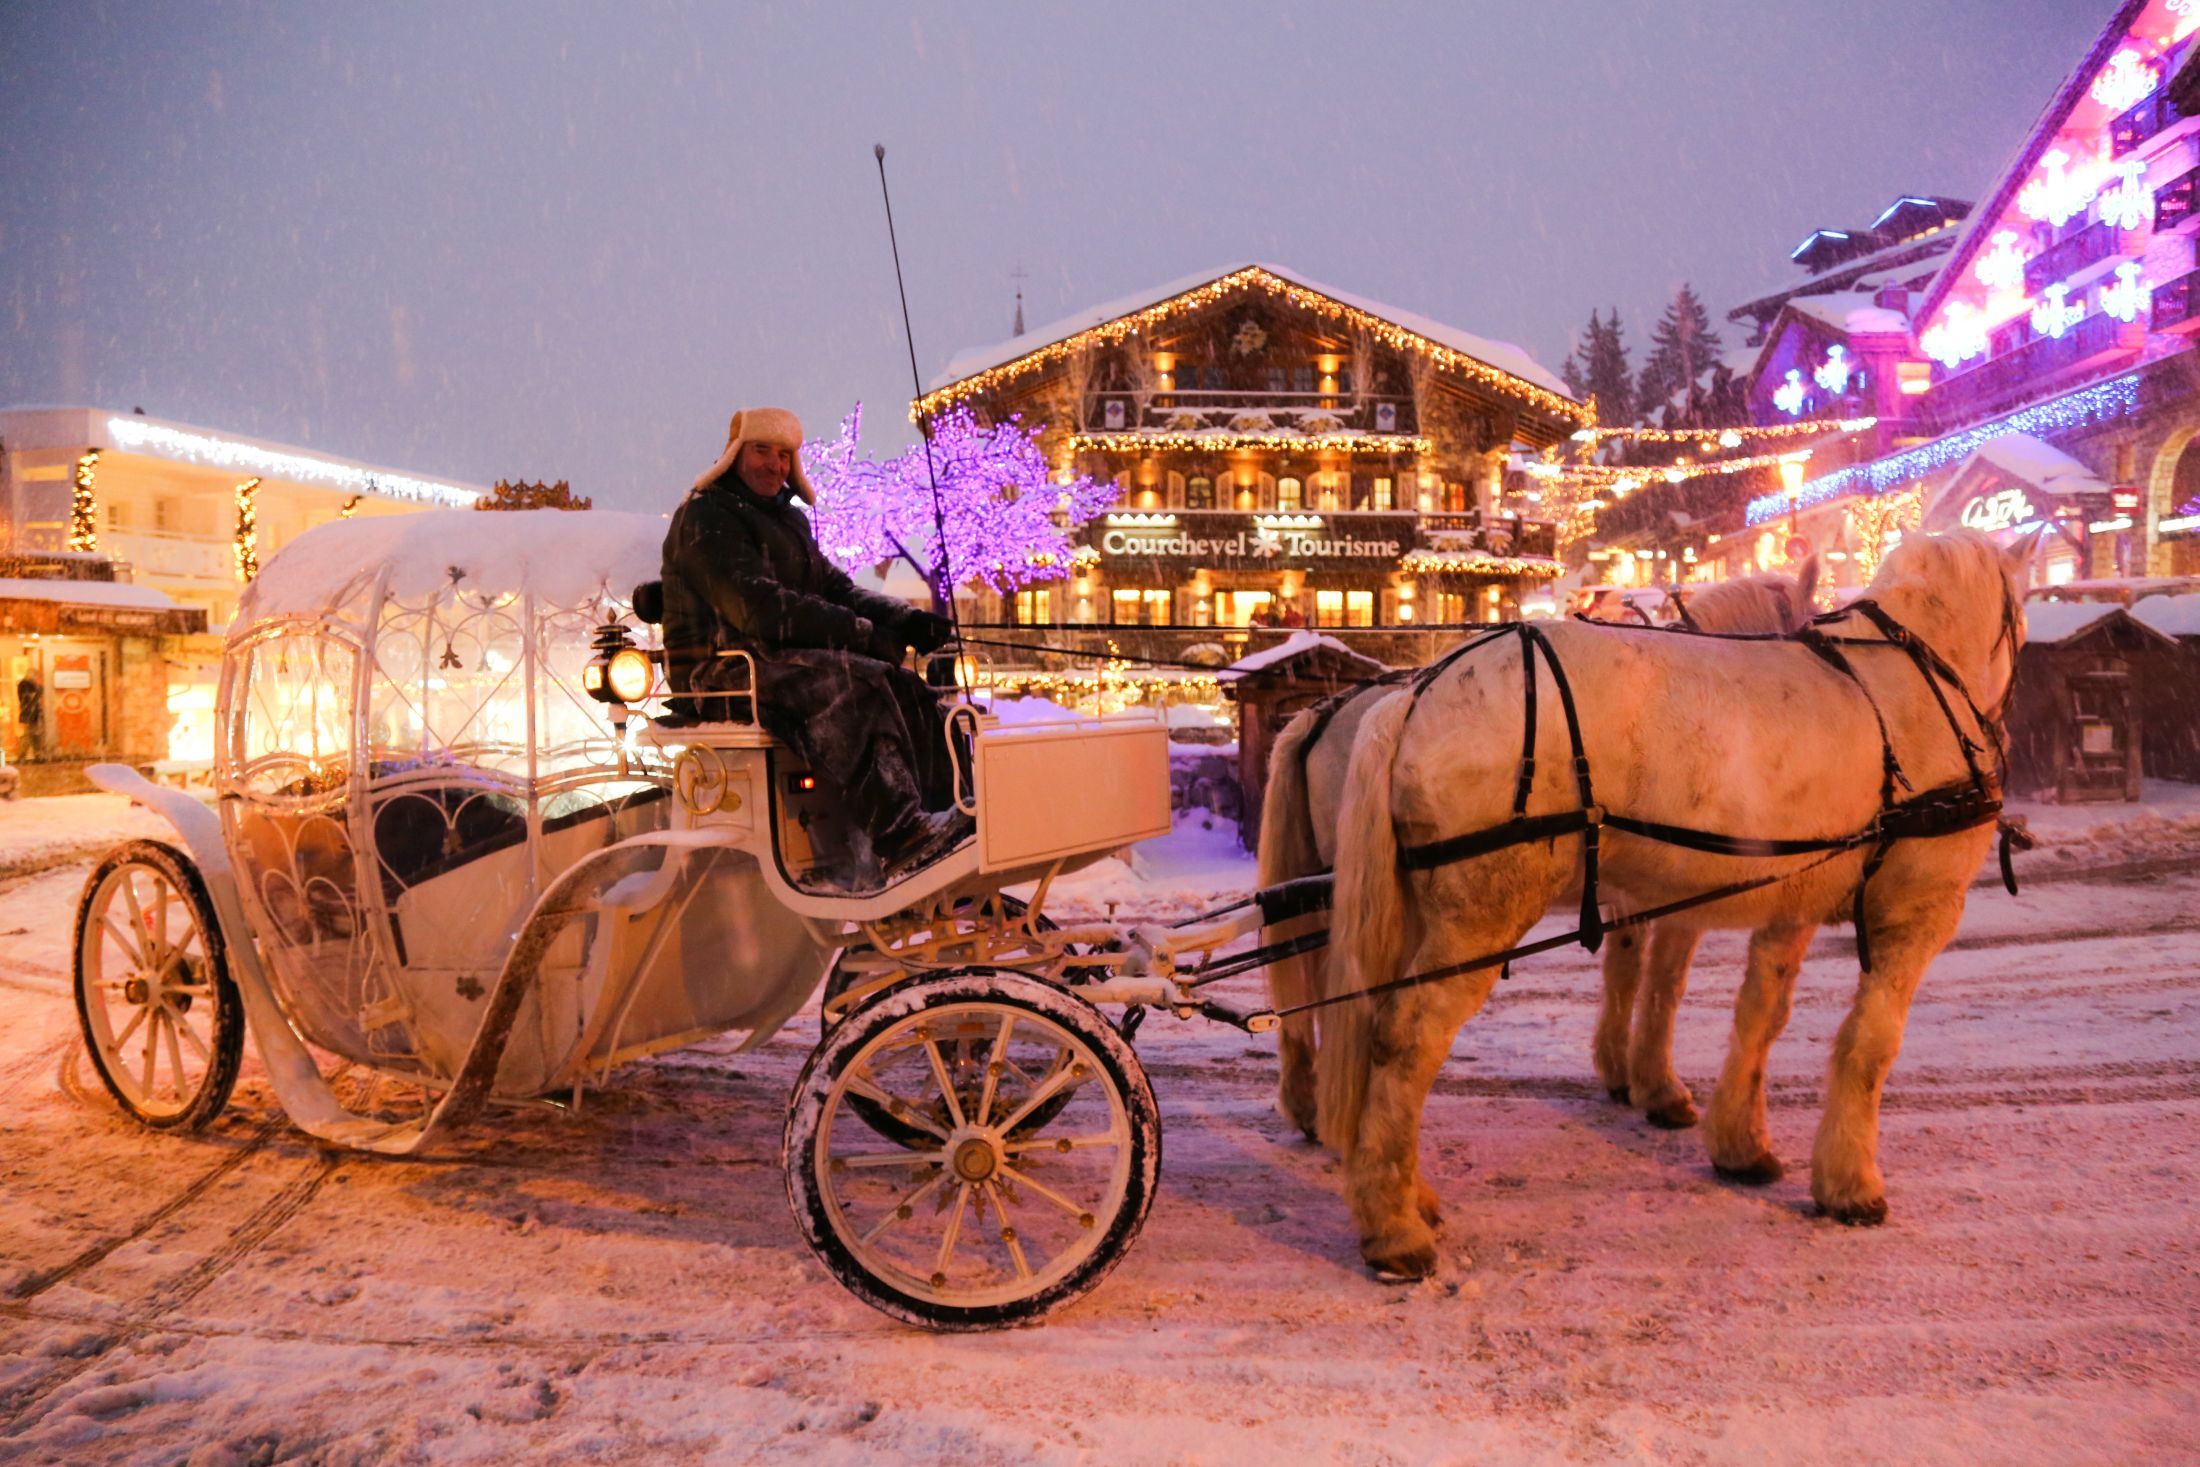 Christmas in Courchevel, showing a horse and kart ride in the snow